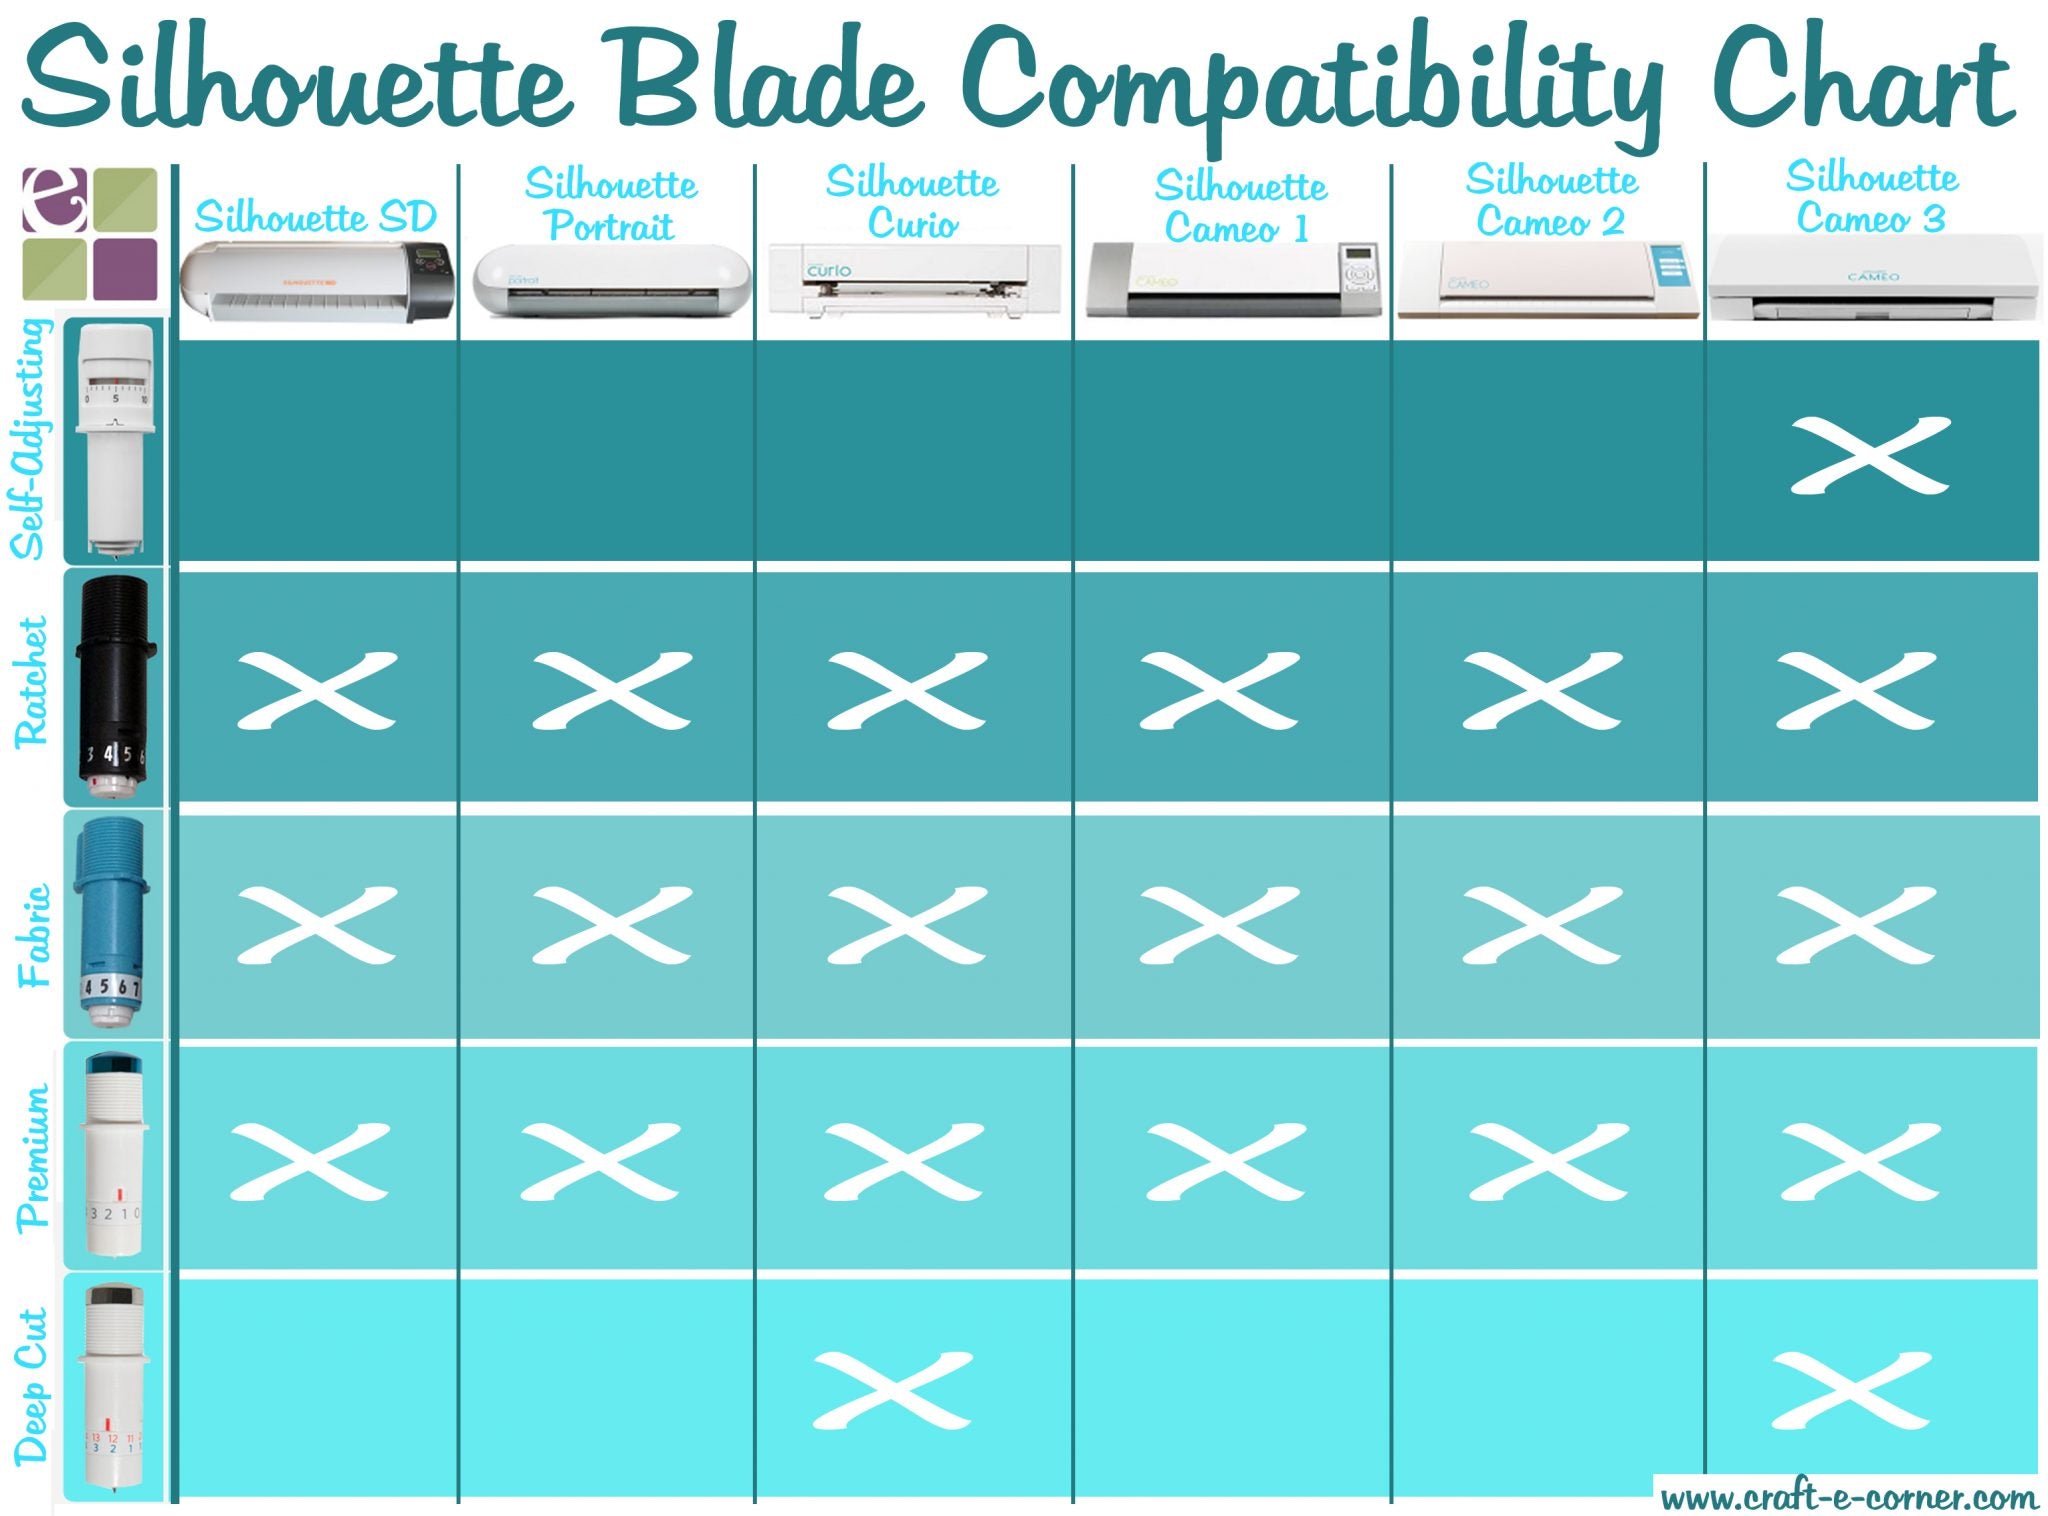 Silhouette 101: All About the Blades